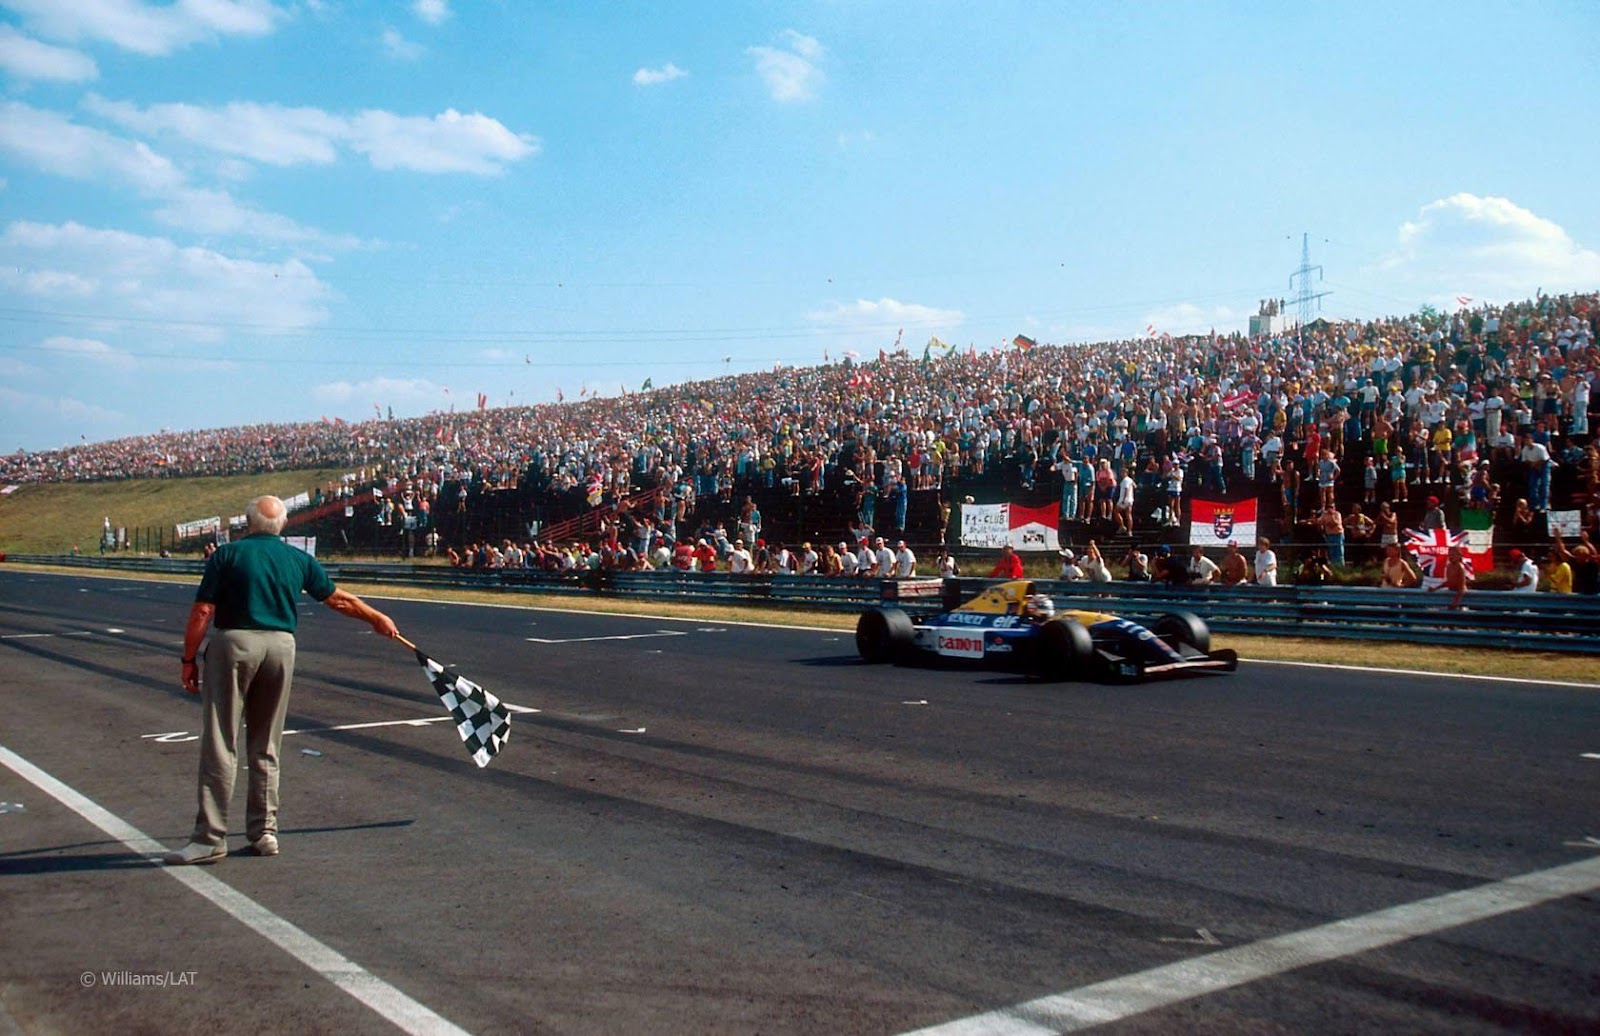 Hungary 1992. The lion crosses the finish line in second position behind Senna and is, finally, World Champion!